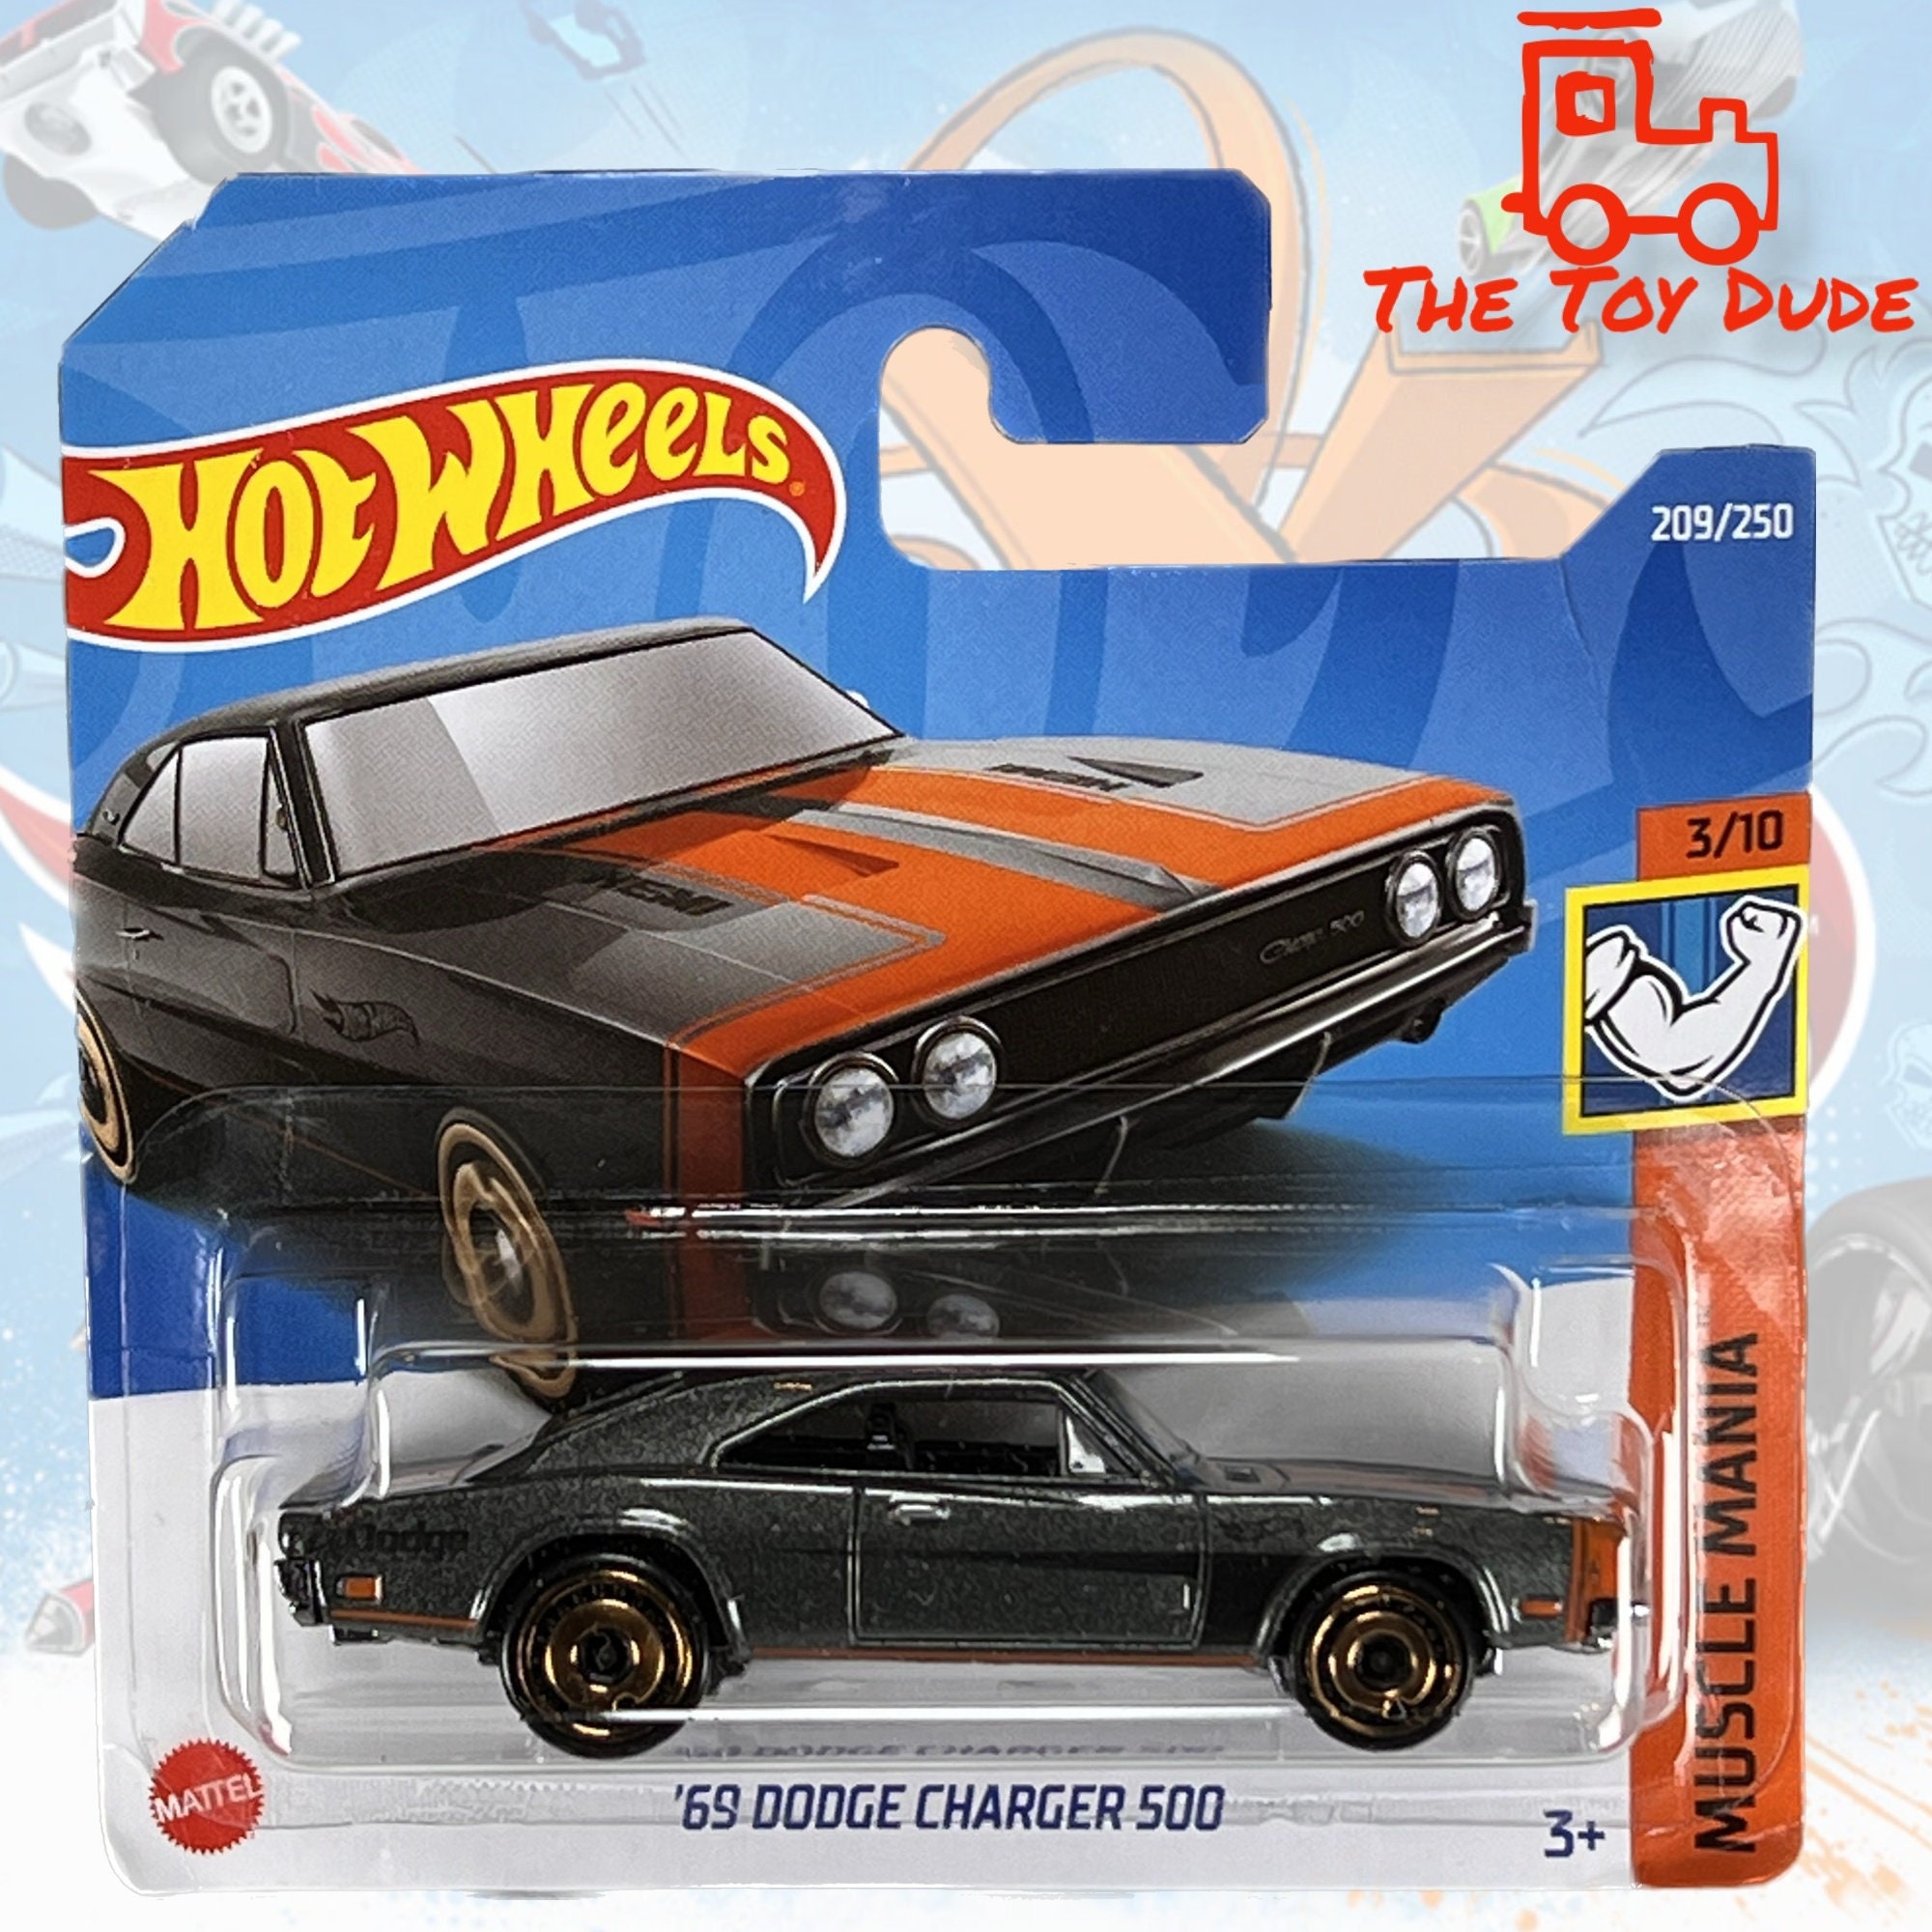 1969 Dodge Charger 500 Hot Wheels Collectible - Etsy New Zealand